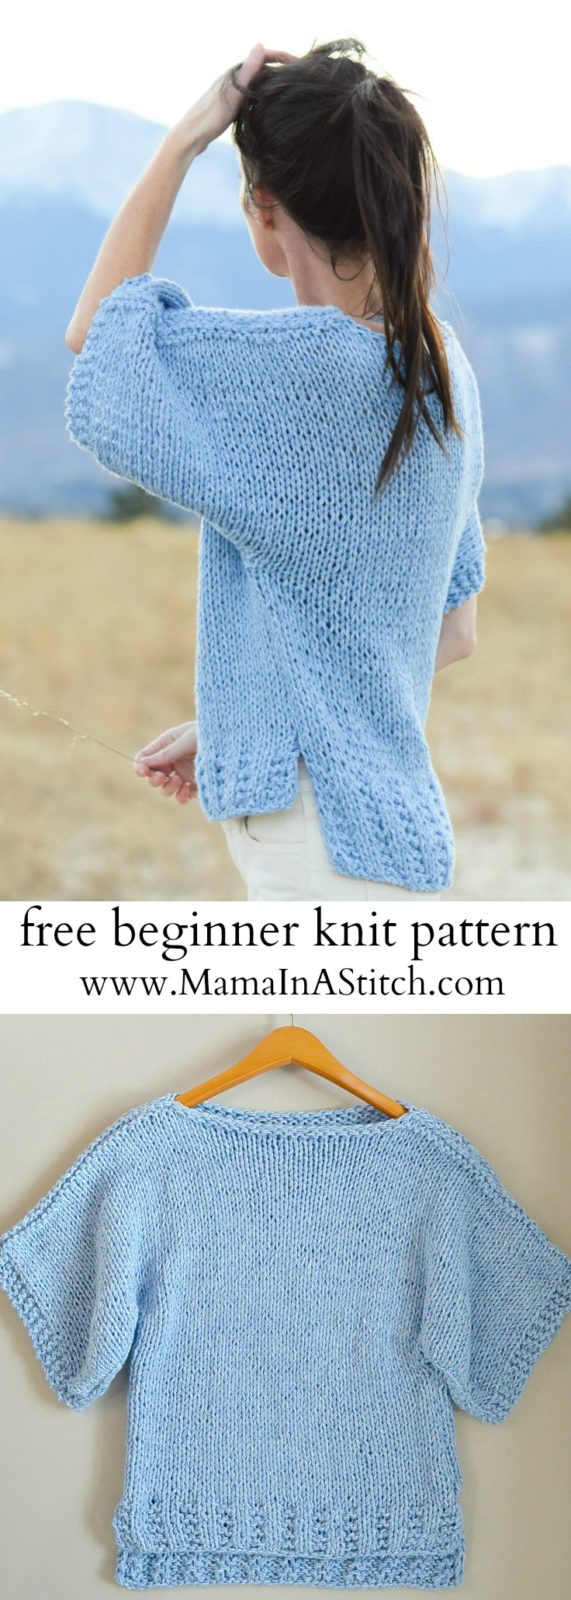 free-knit-sweater-patterns-printable-worksheets-children-s-ideas